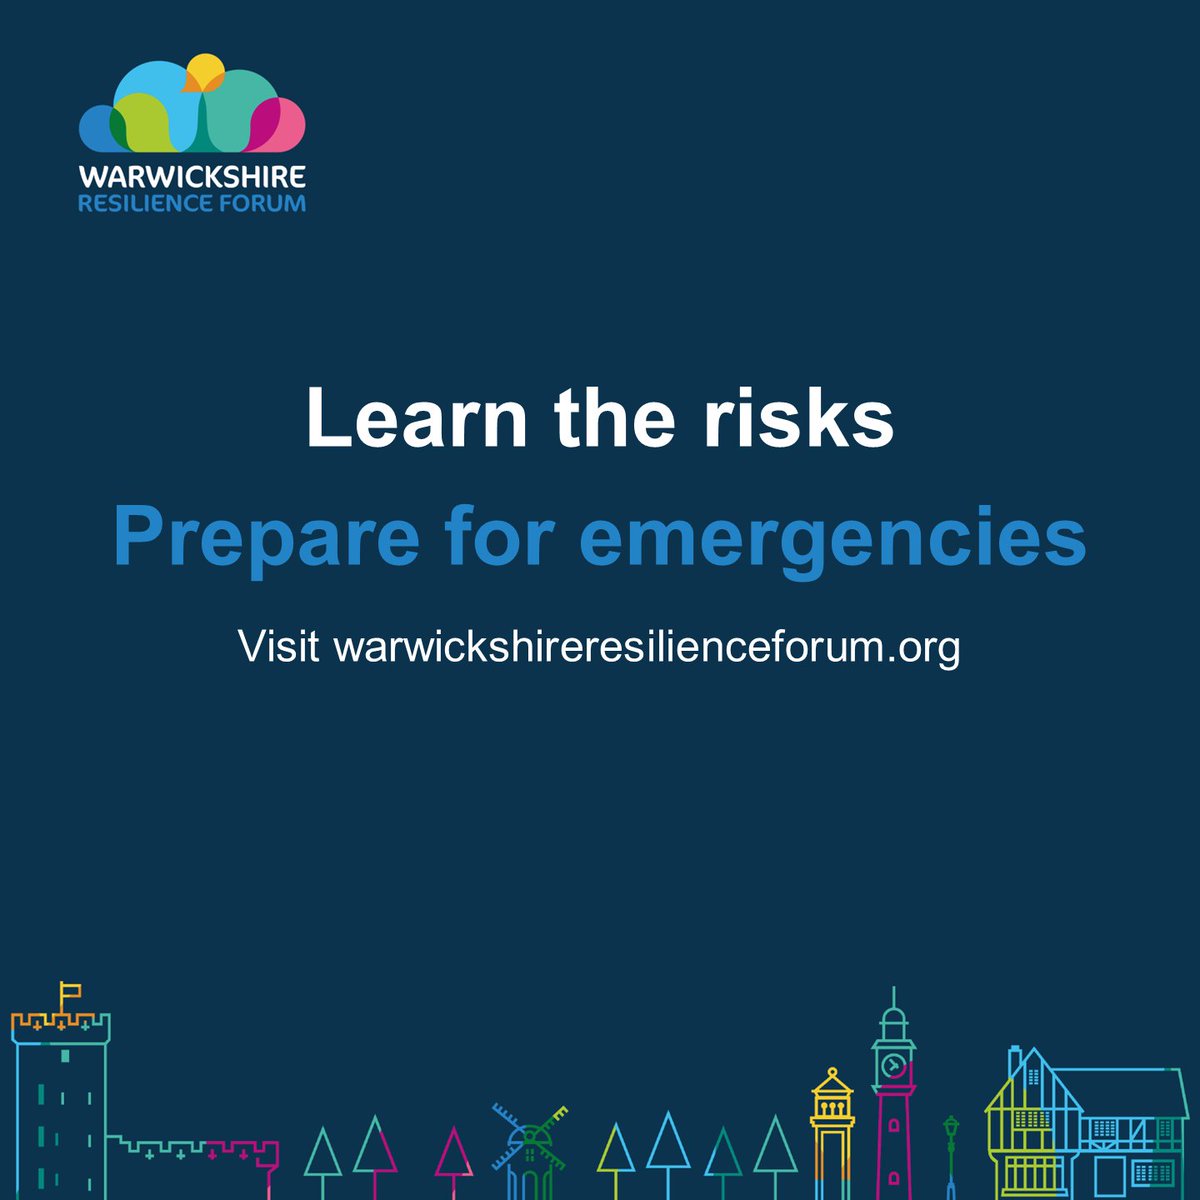 Visit the new Warwickshire Resilience Forum website to learn how you can become better prepared for emergencies in #Warwickshire. Find information and advice around the county's key risks at warwickshireresilienceforum.org